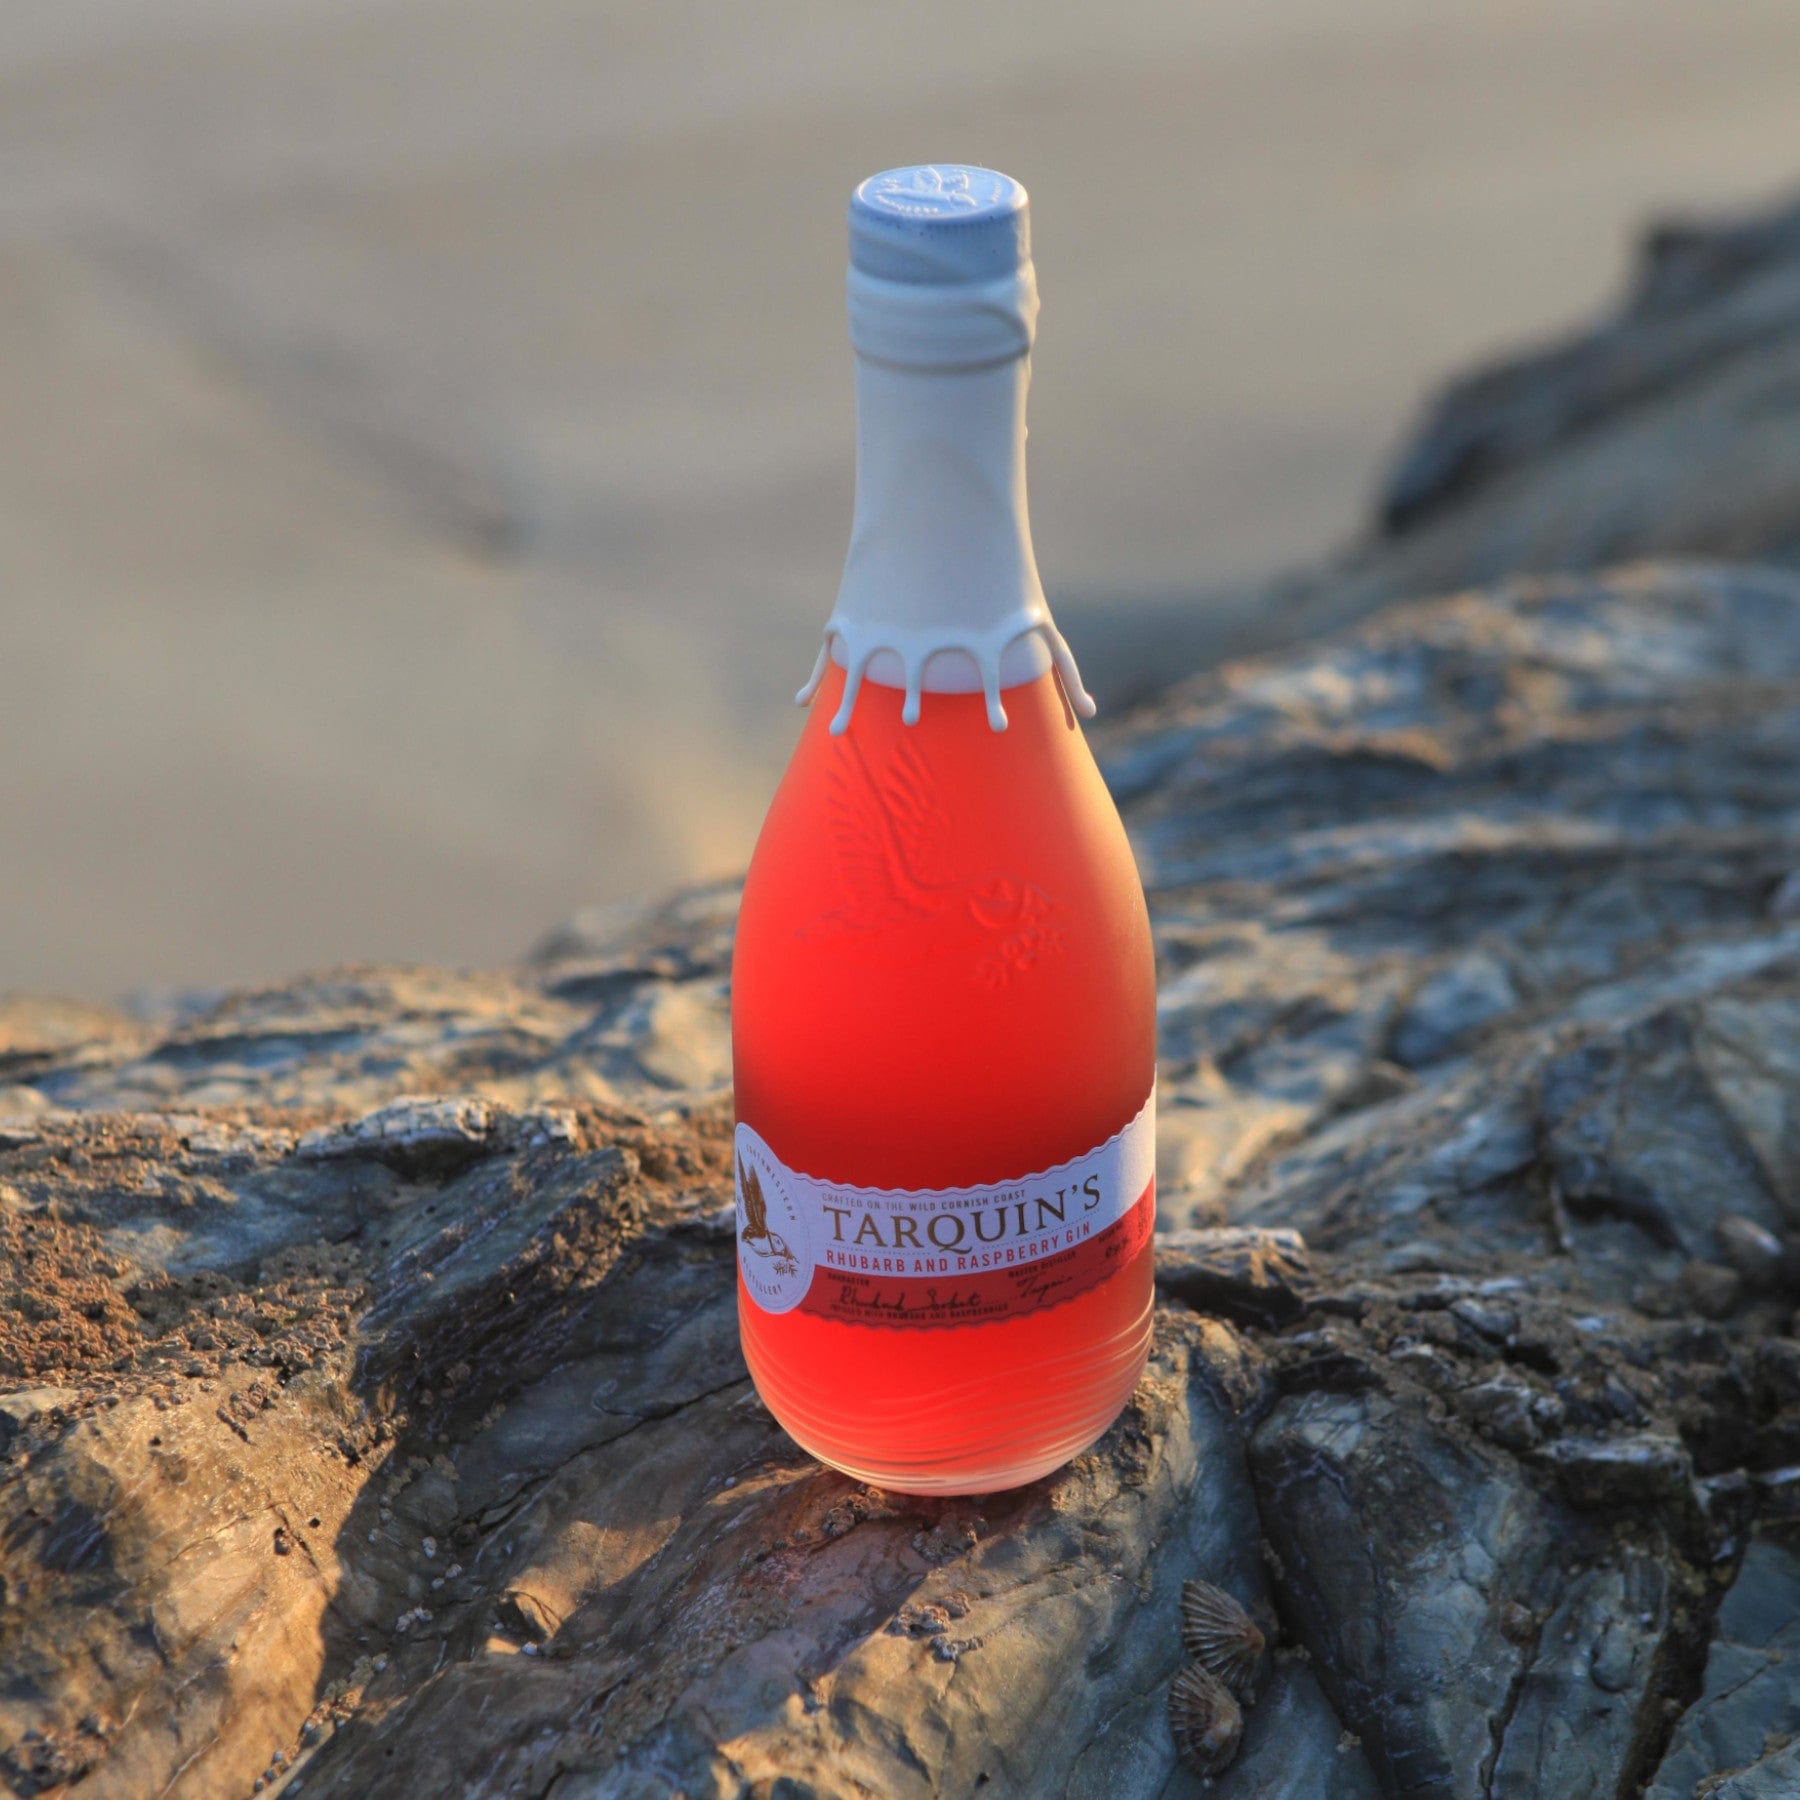 Tarquin's Cornish Gin bottle with pink hue sitting on rugged coastal rocks during sunset.